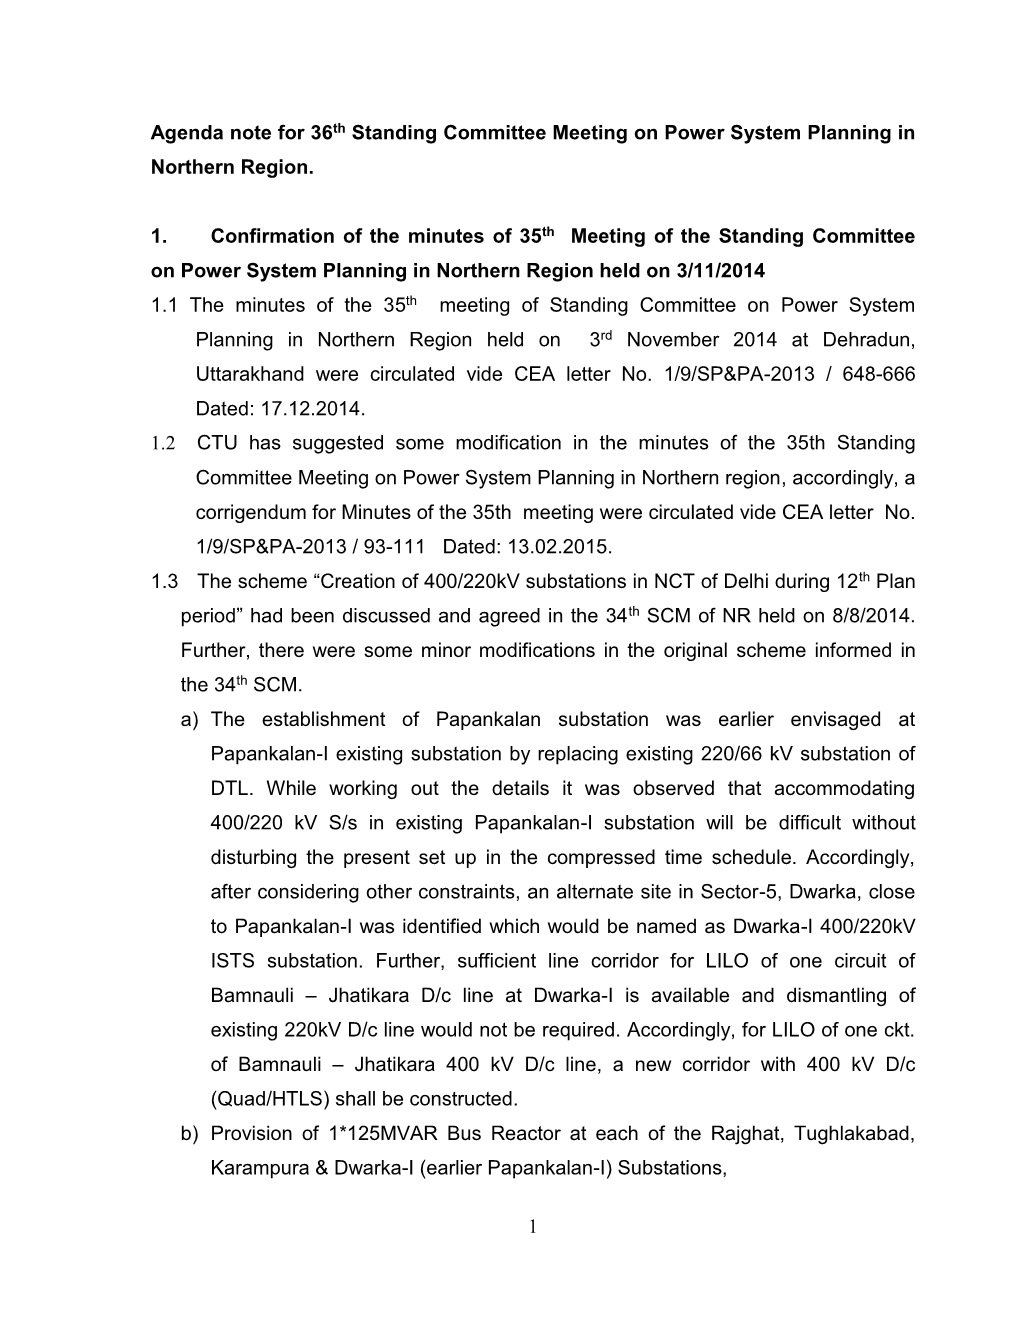 Agenda Note for 36Th Standing Committee Meeting on Power System Planning in Northern Region